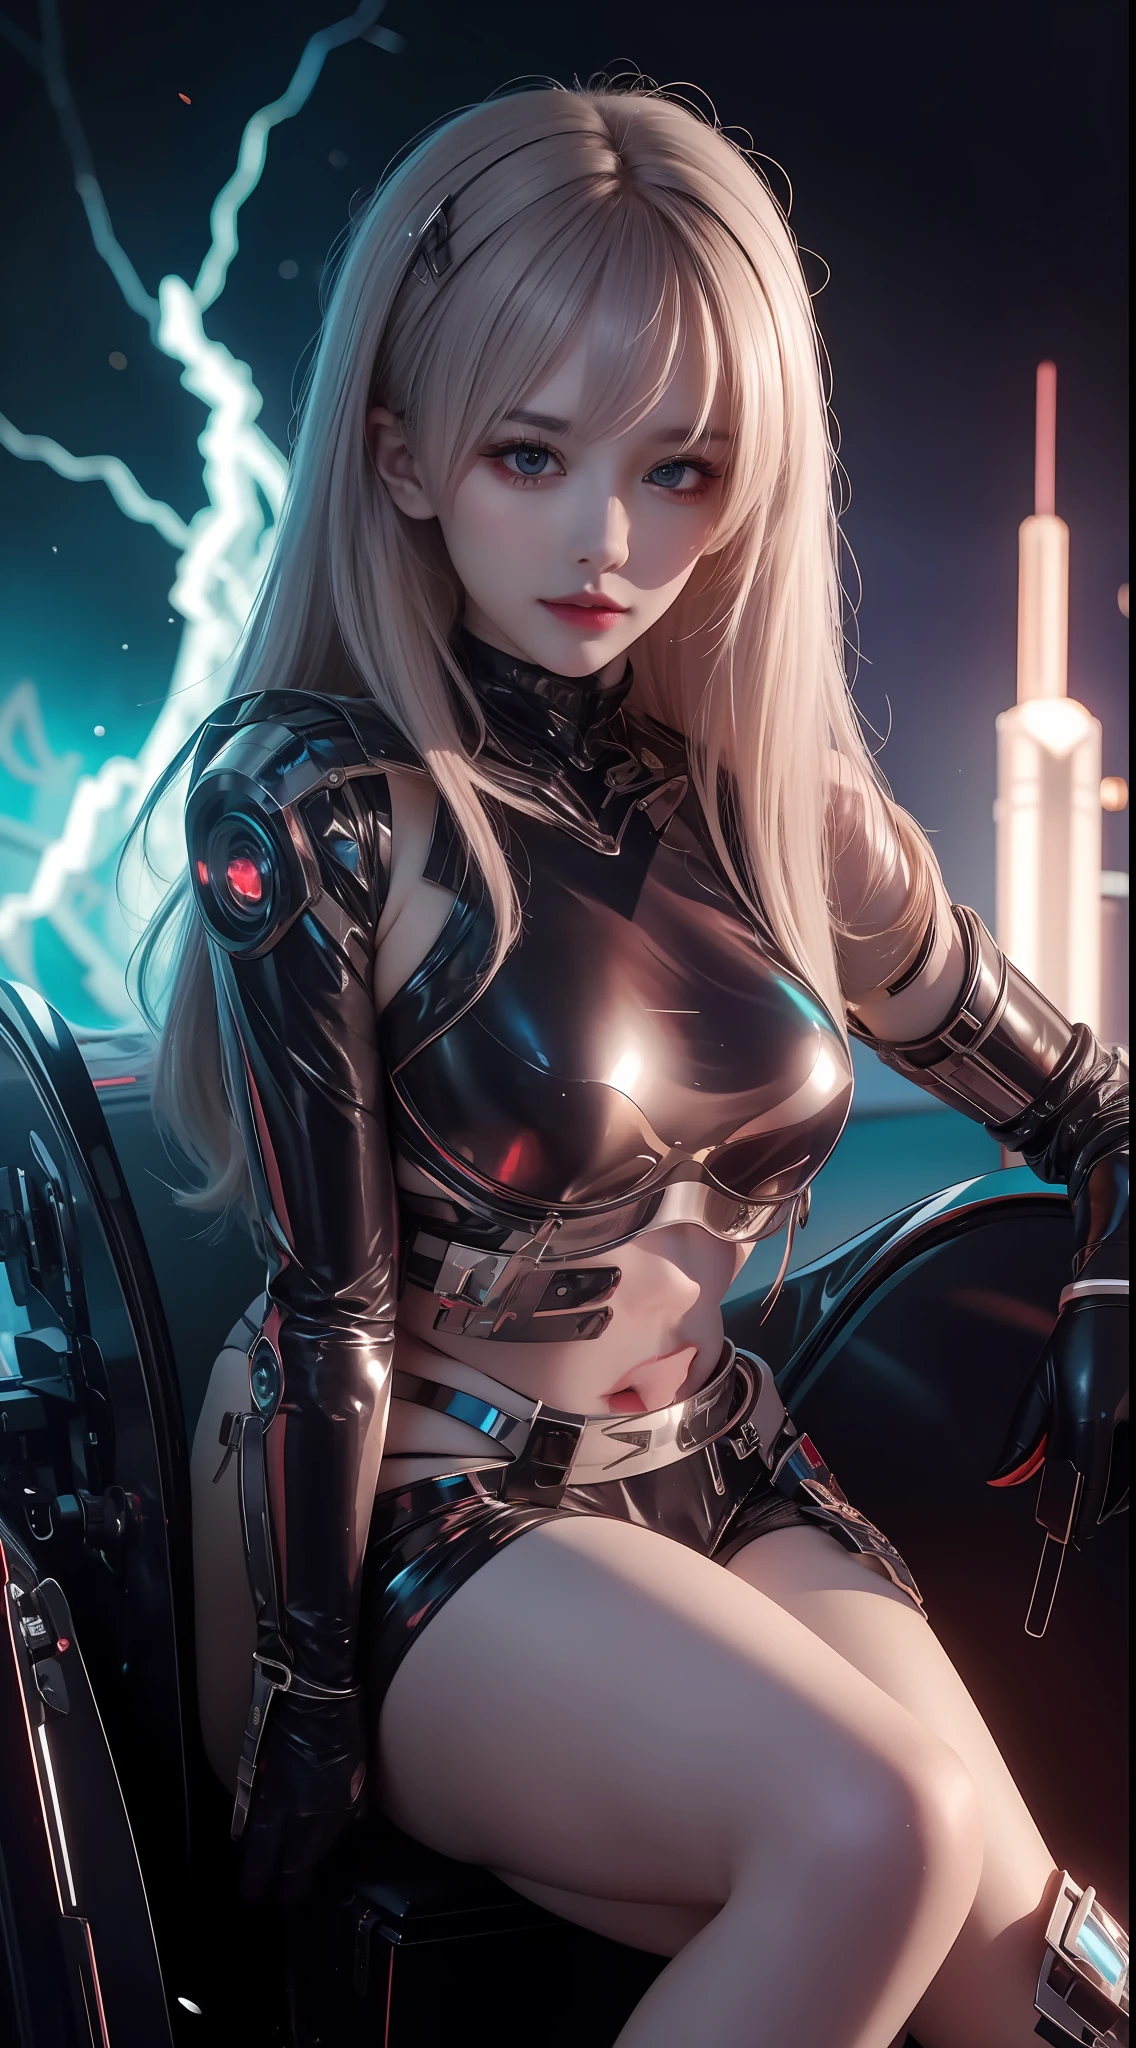 8K uhd, materpiece, a beautiful girl, detaild eye, good face, detaild eyebrow, cyberpunk outfit, lightning outfit, cyberpunk, Cyberspace, cyberpunk shining colorful background, neon effect, Spreading lighting, red lighting, sitting, body capture,